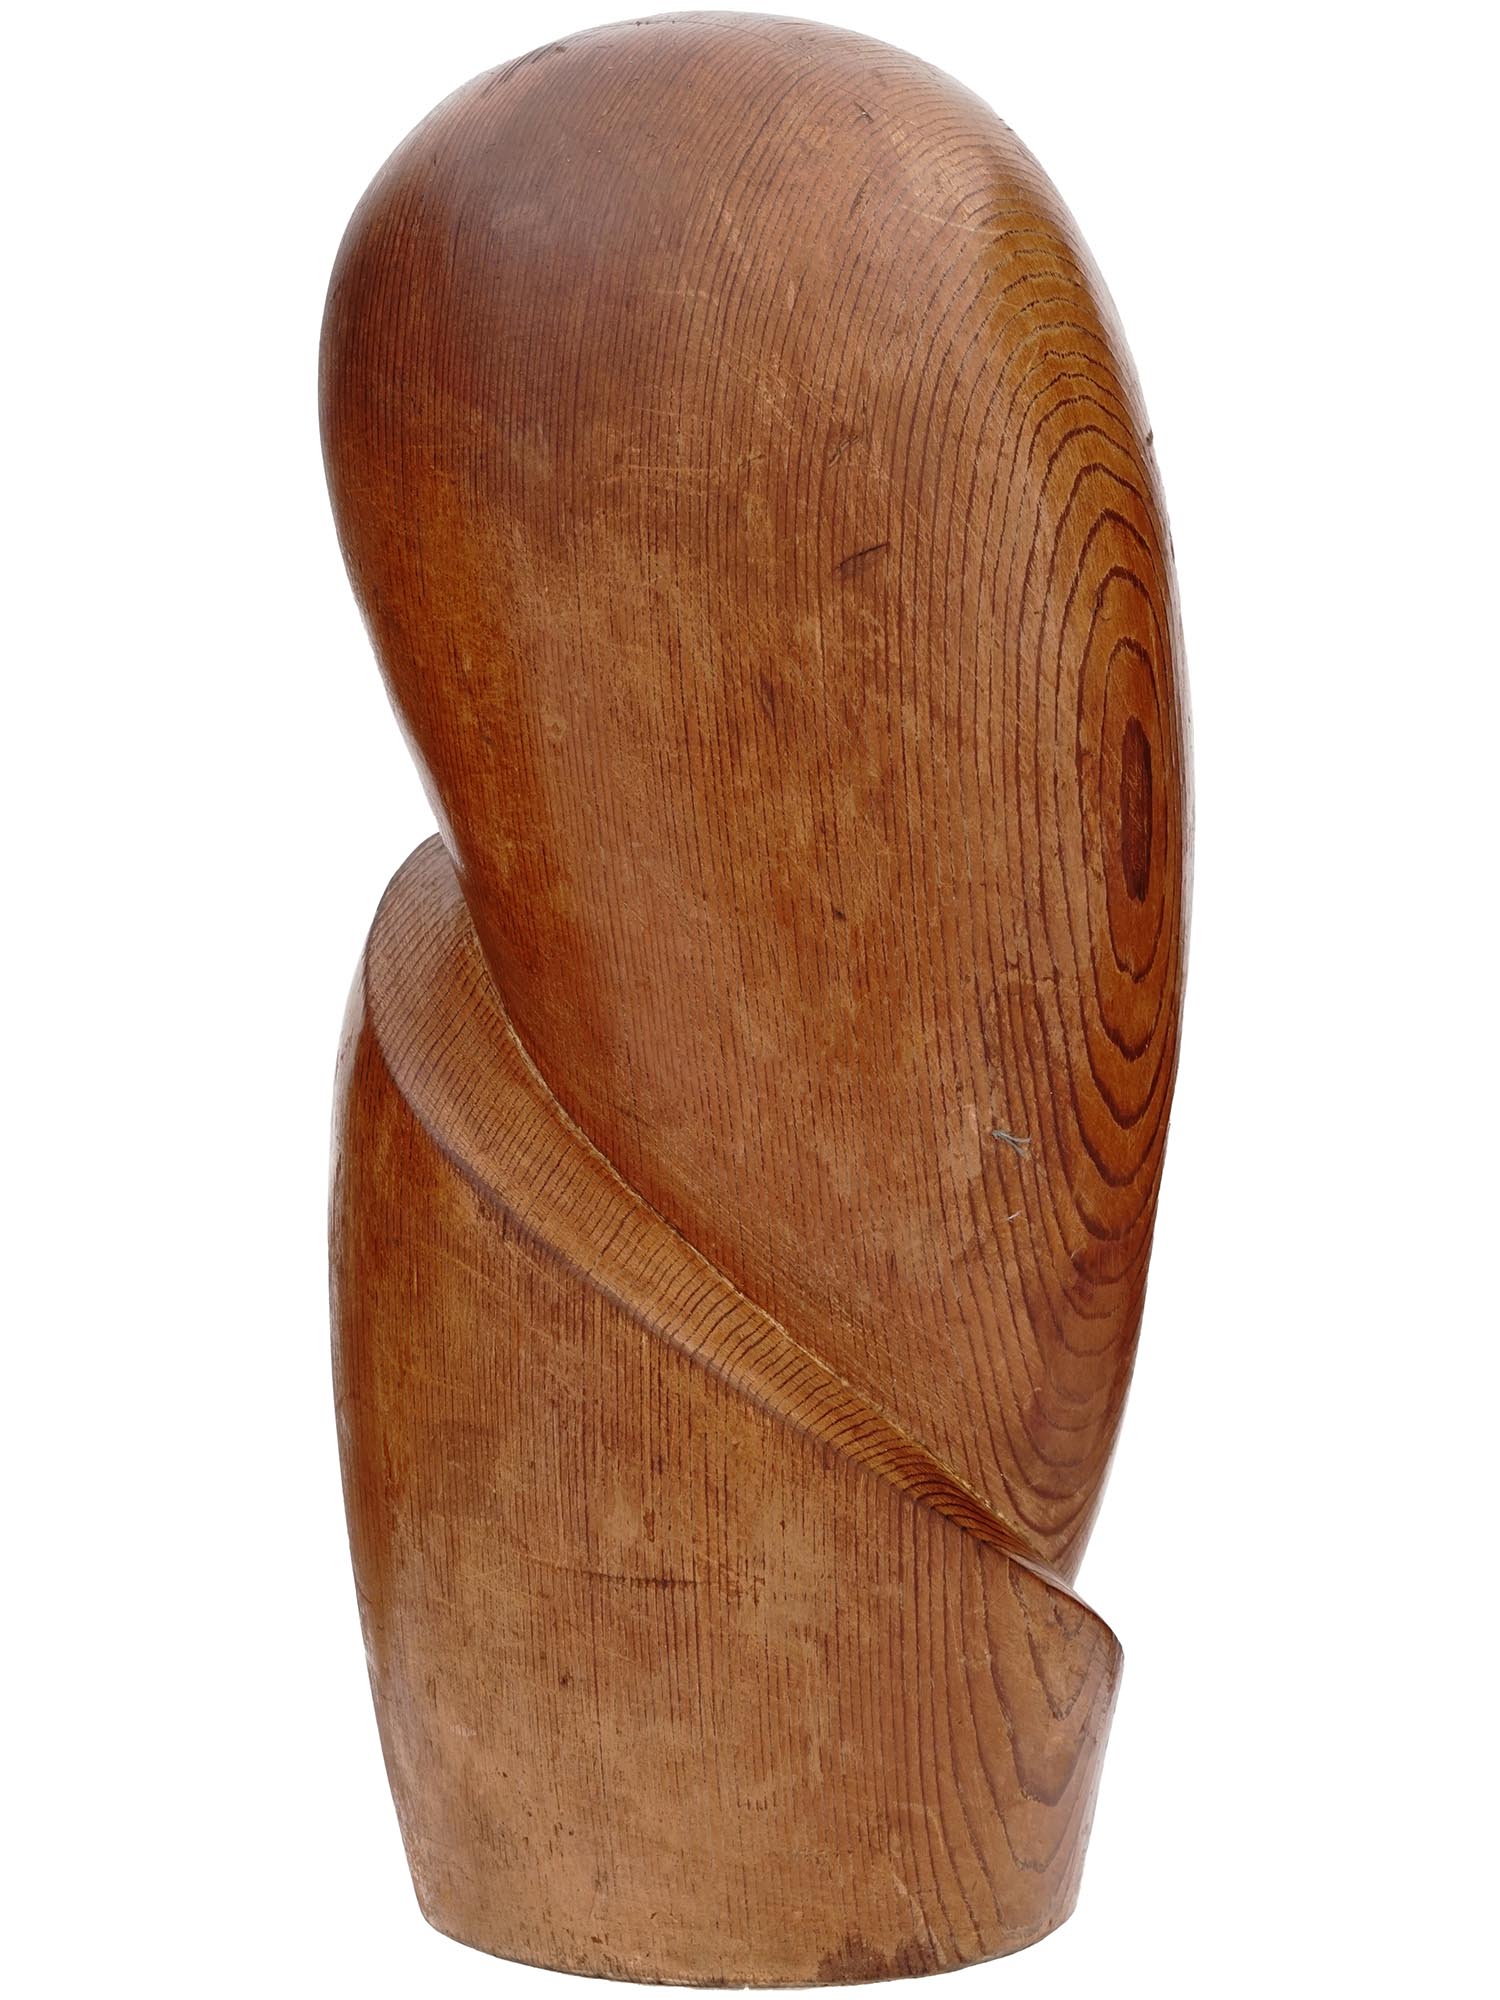 SCULPTURE MOTHER AND CHILD AFTER BRANCUSI SIGNED PIC-3